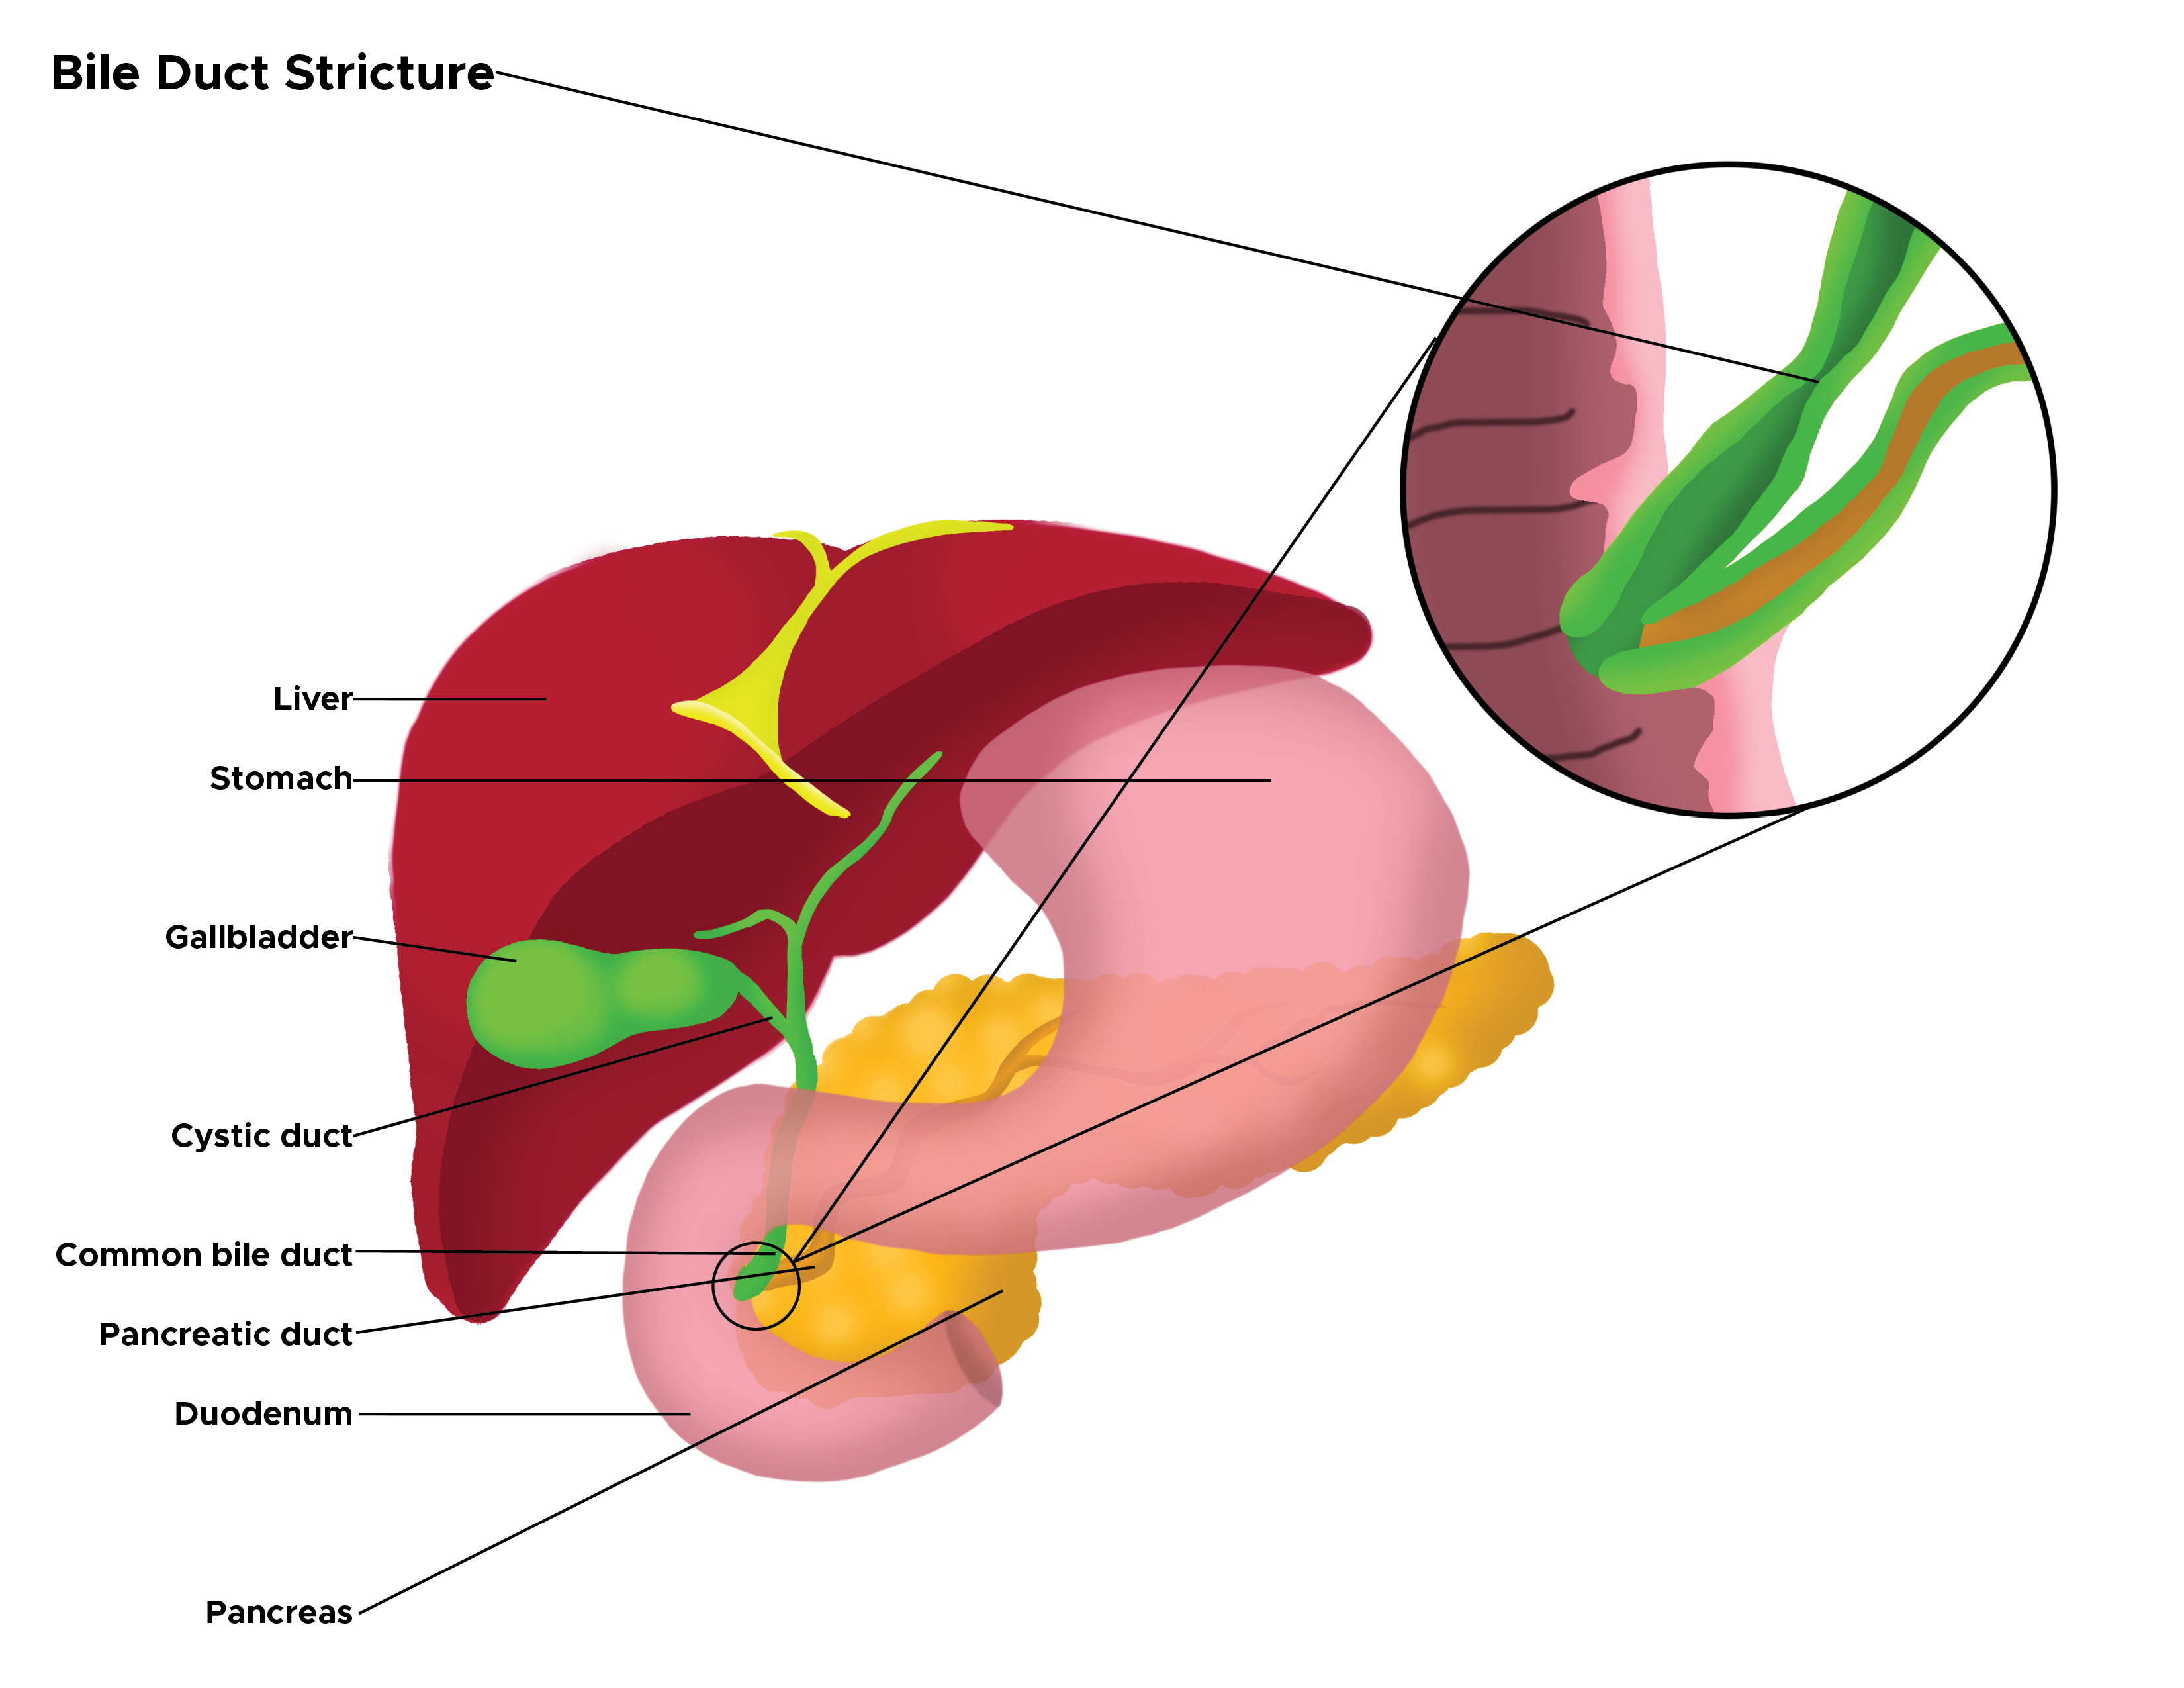 Illustration of bile duct stricture